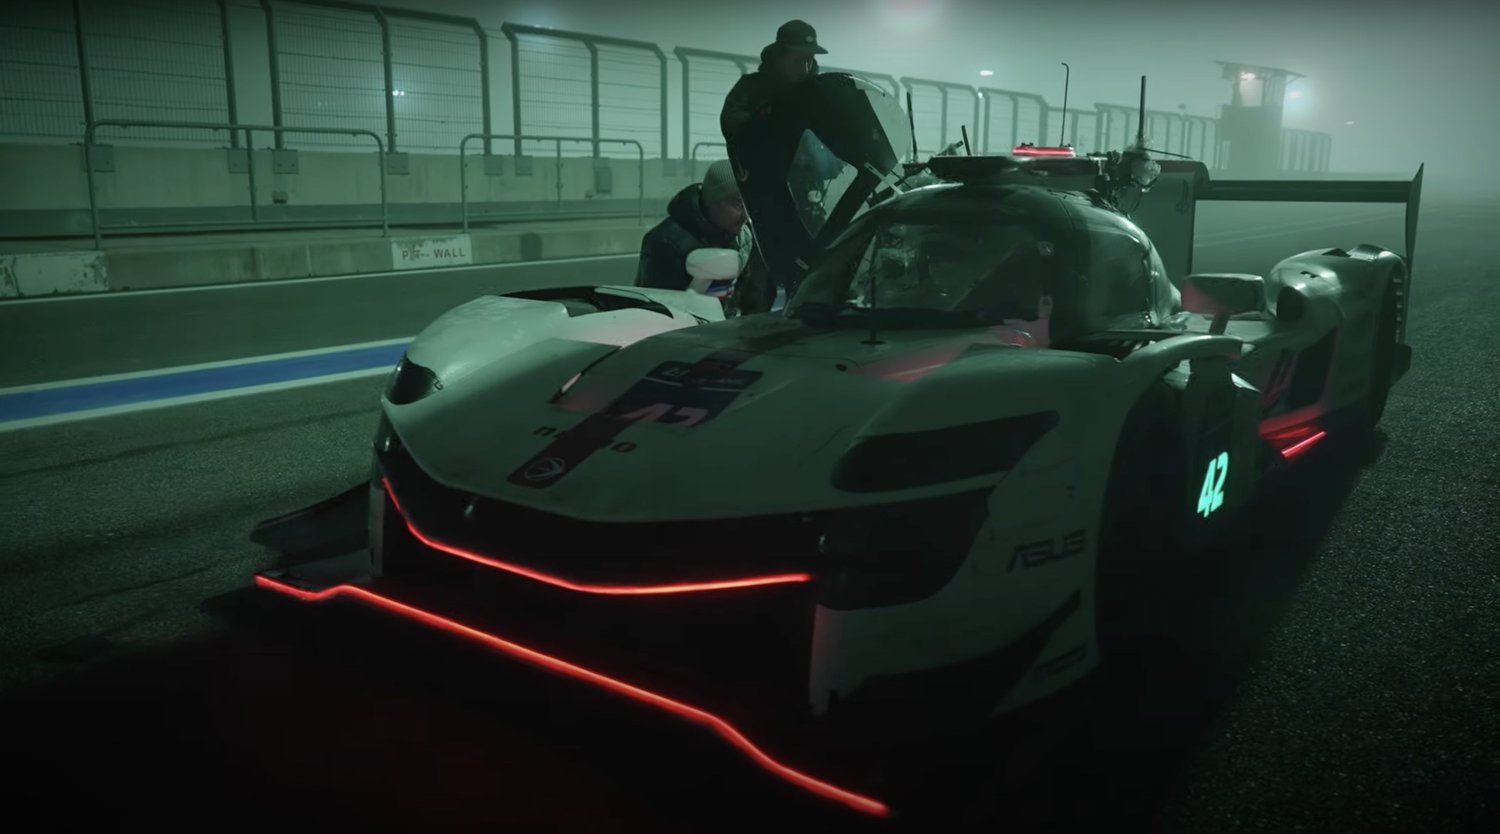 Cool GRAN TURISMO Behind the Scenes Video Show How the Racing Action Was Filmed